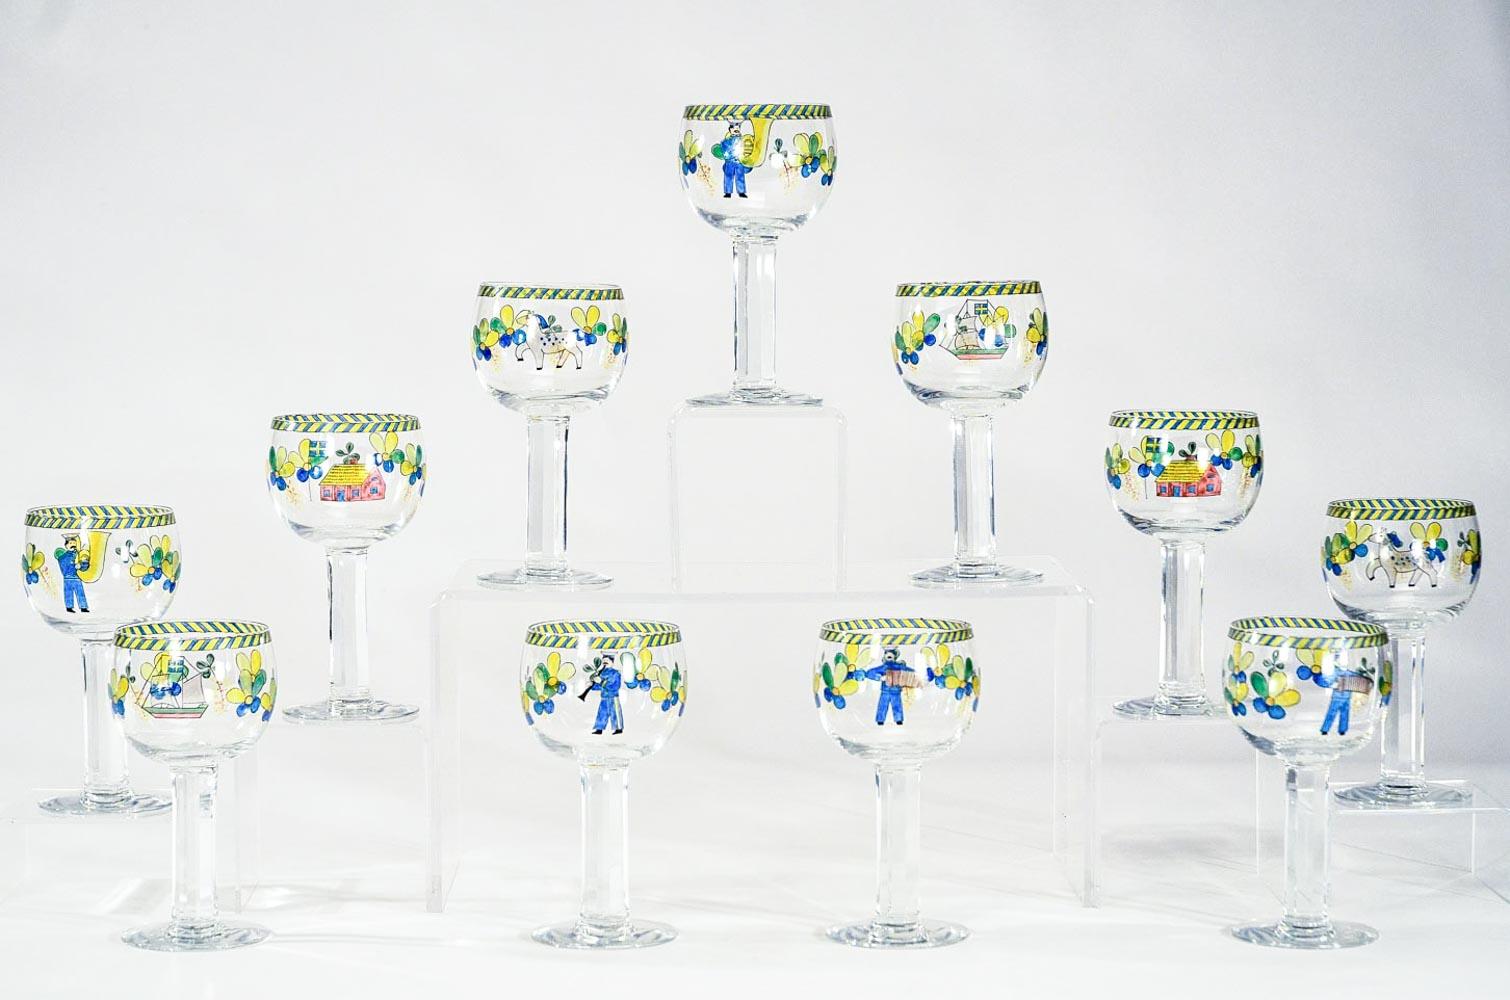 A wonderful set of 11 large goblets, made by Orrefors with panel cut and polished columnar stems. Each signed glass is individually hand painted with whimsical and playful 